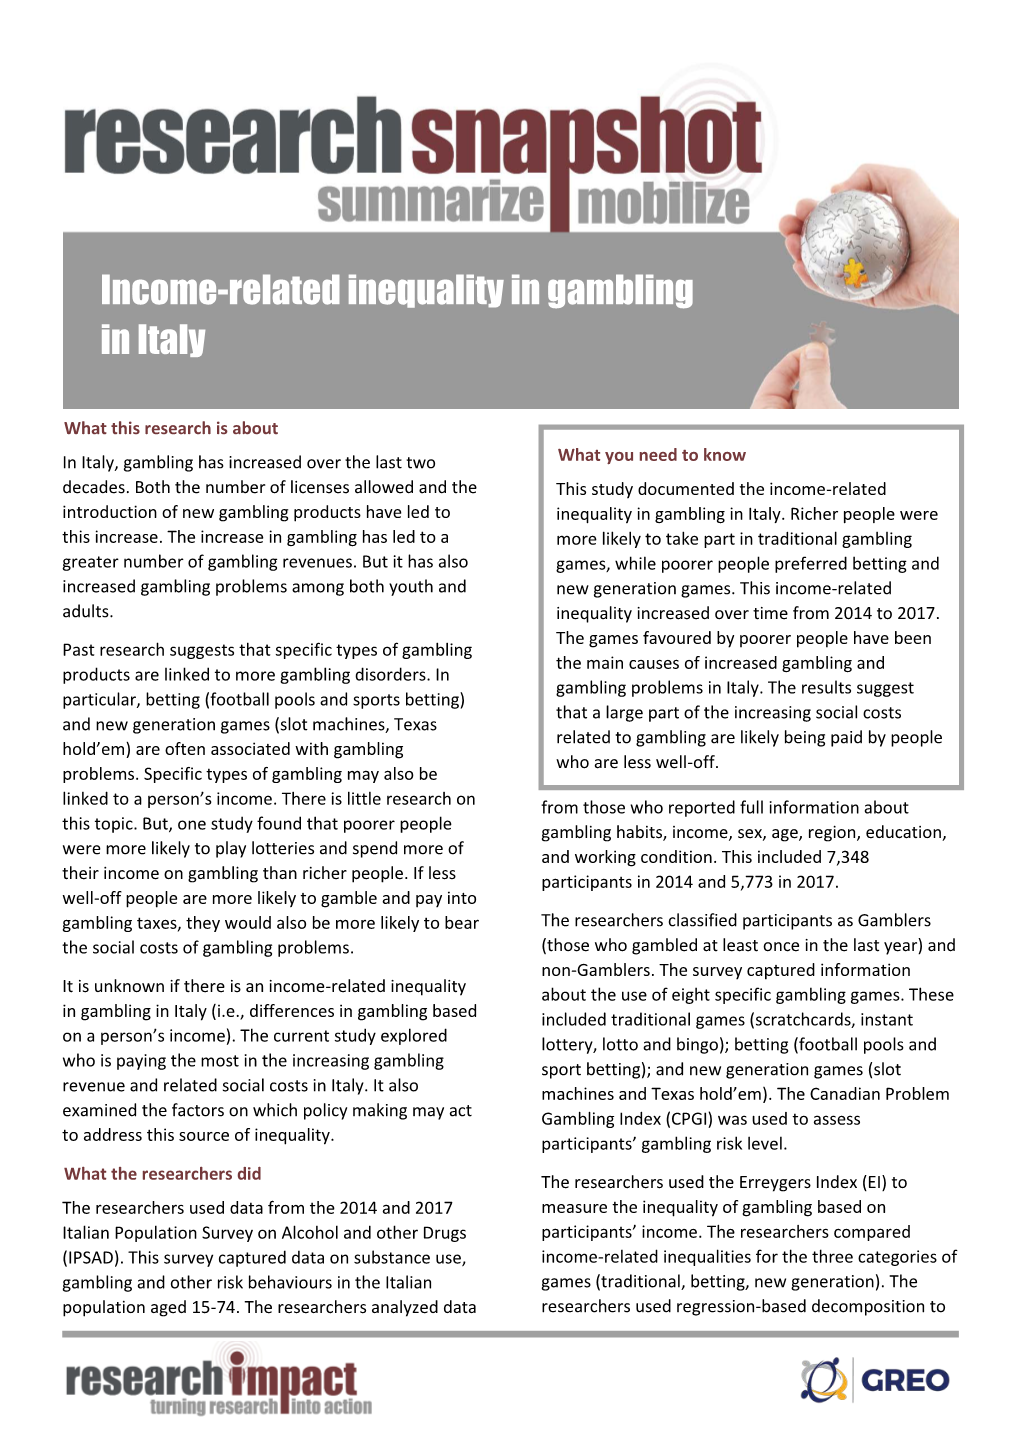 Income-Related Inequality in Gambling Evidence from Italy Final.Docx